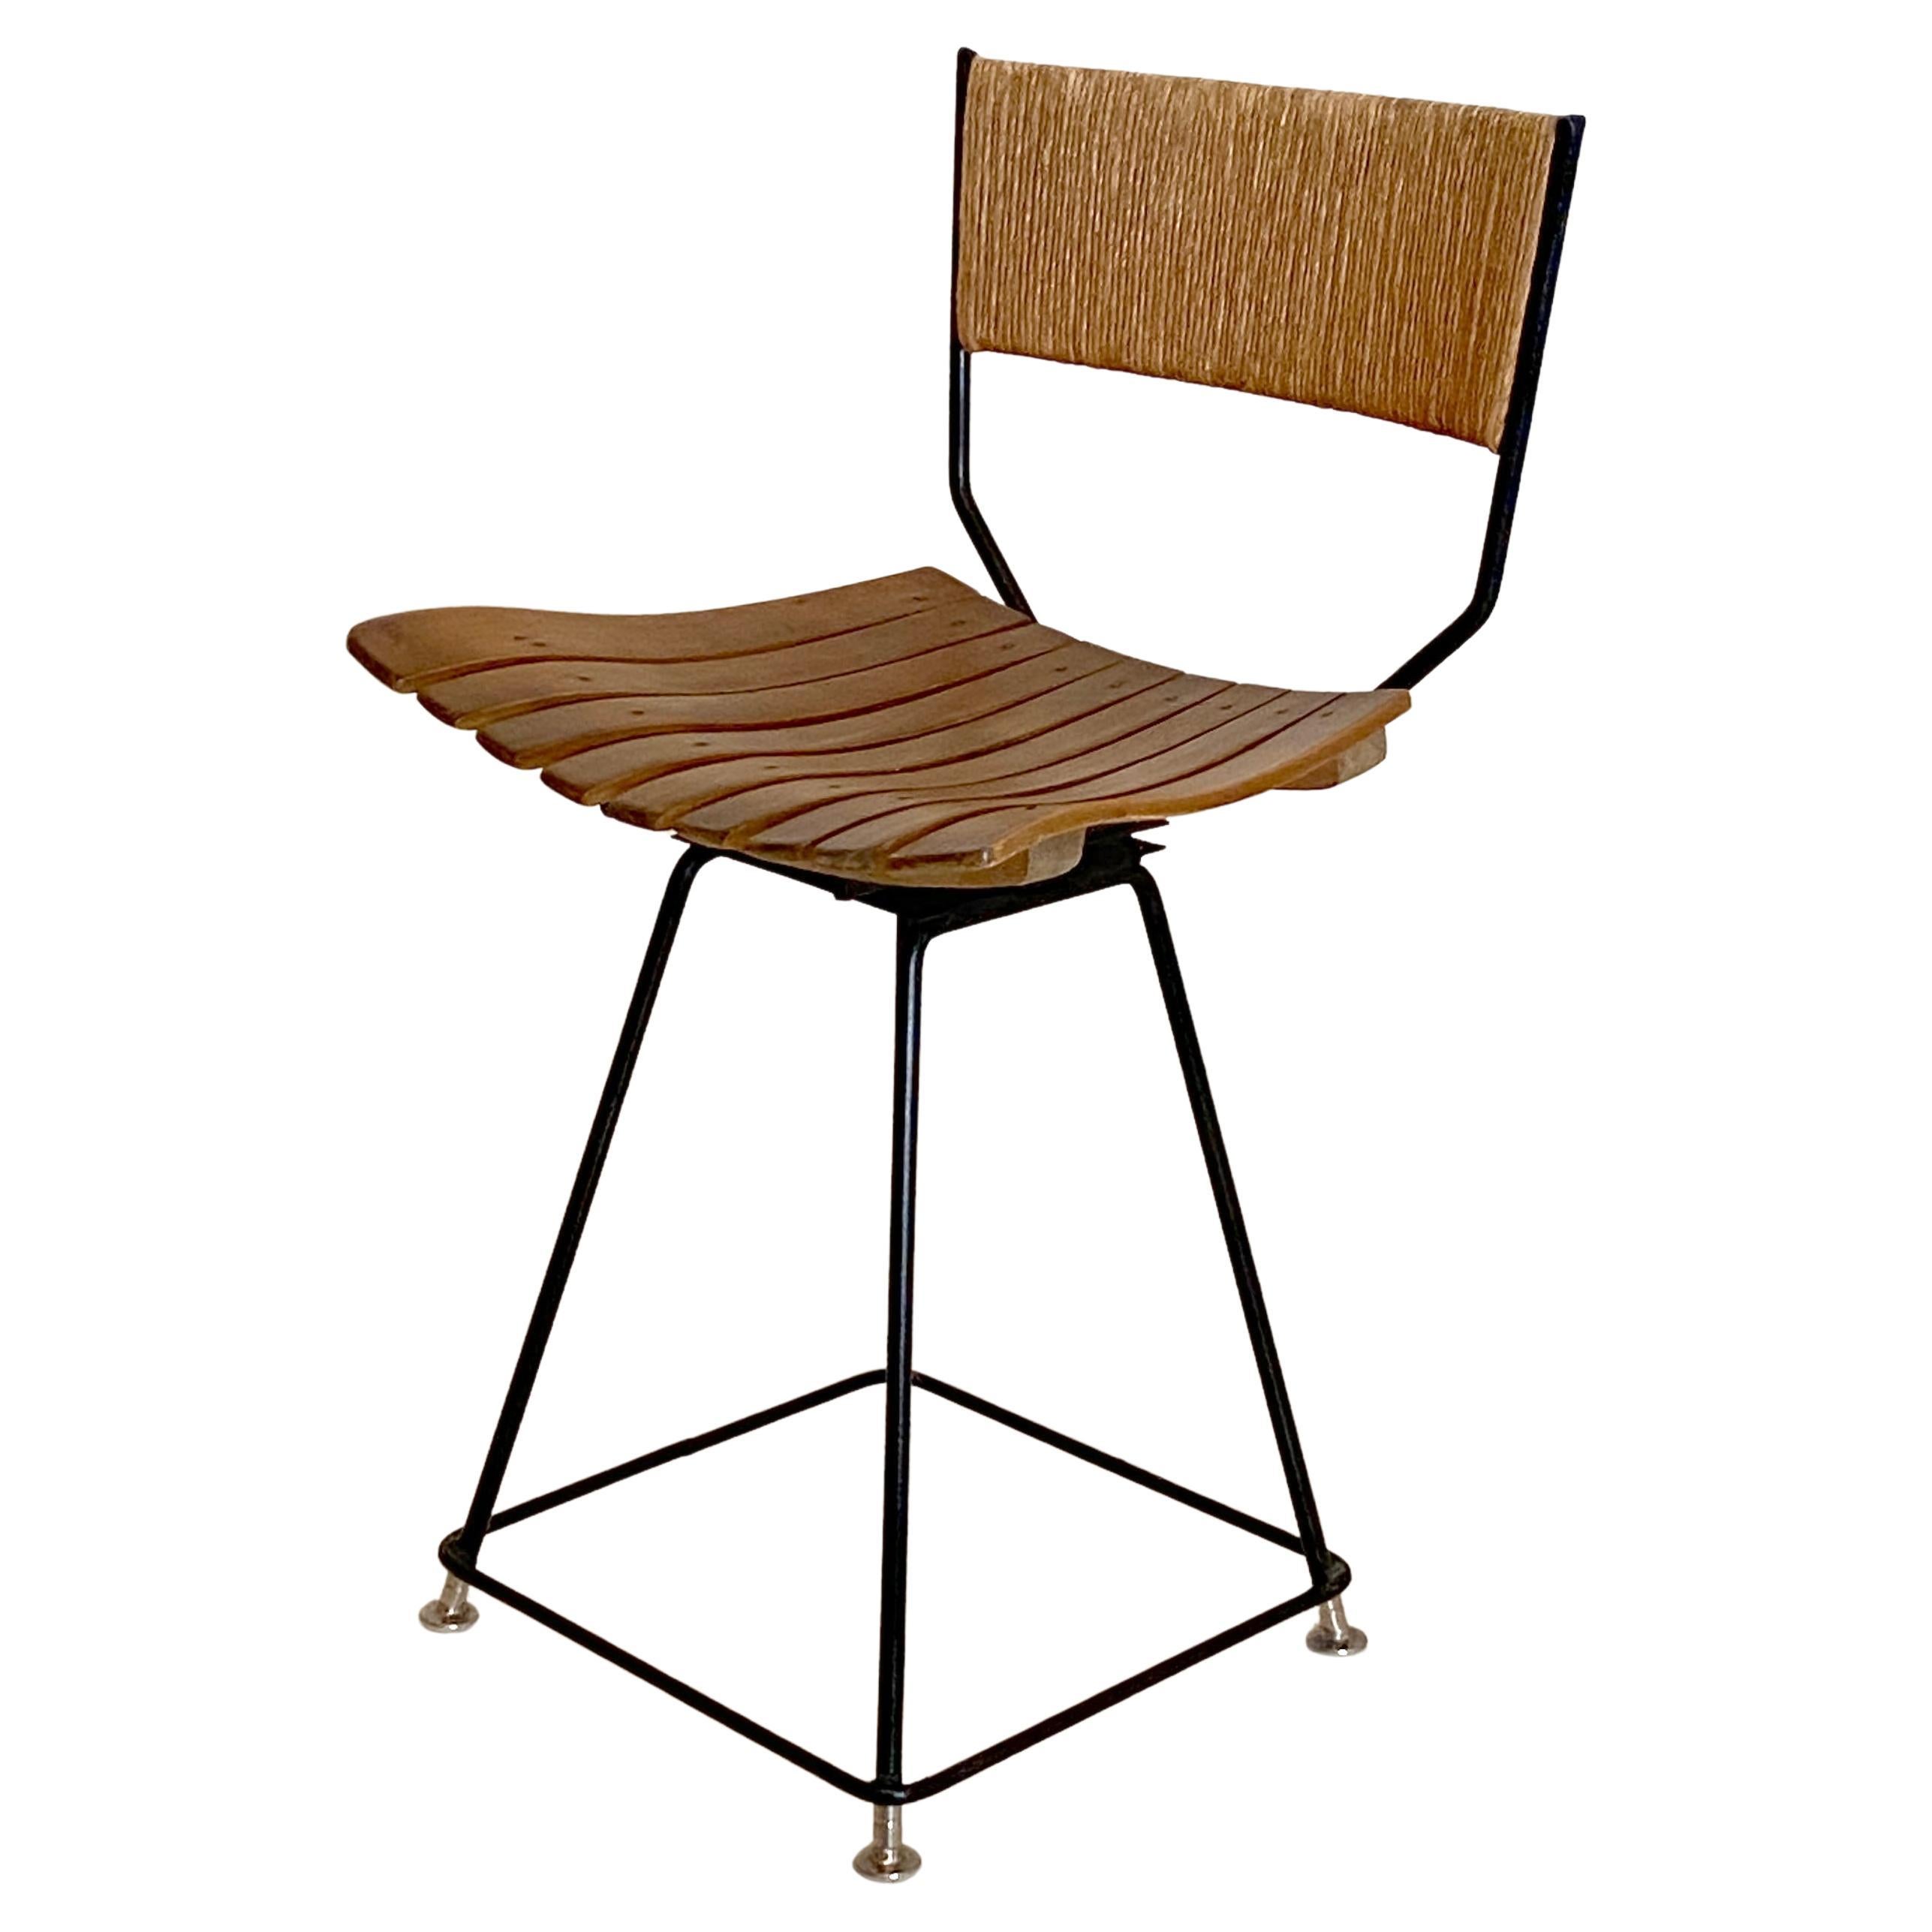 Uncommon Height Desk Chair from Arthur Umanoff For Sale